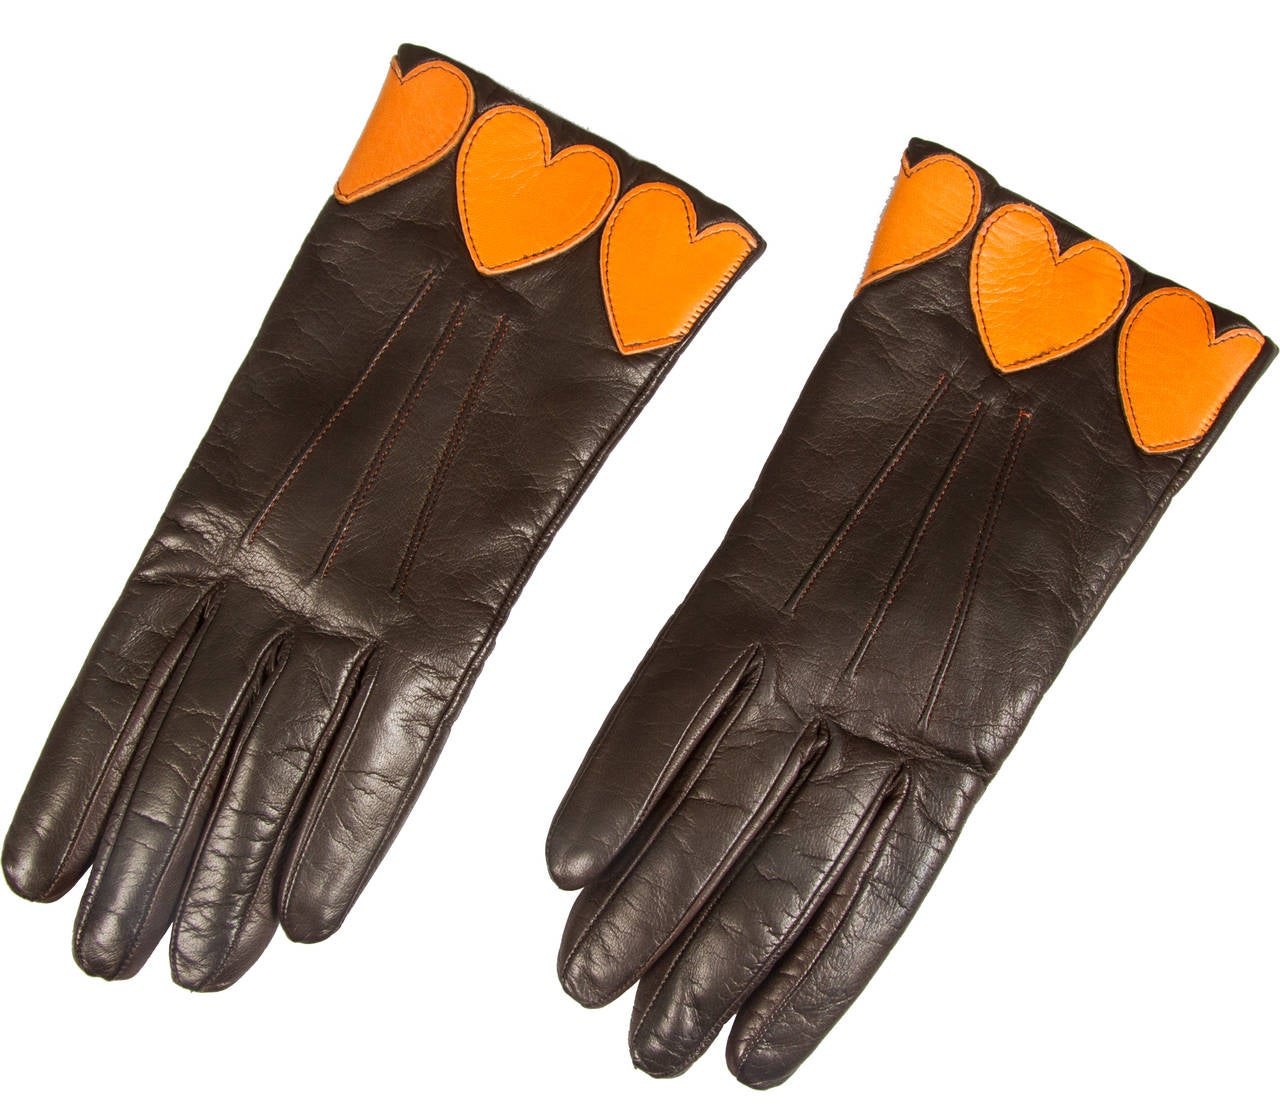 Fun gloves in a rich chocolate brown accented  with orange hearts.